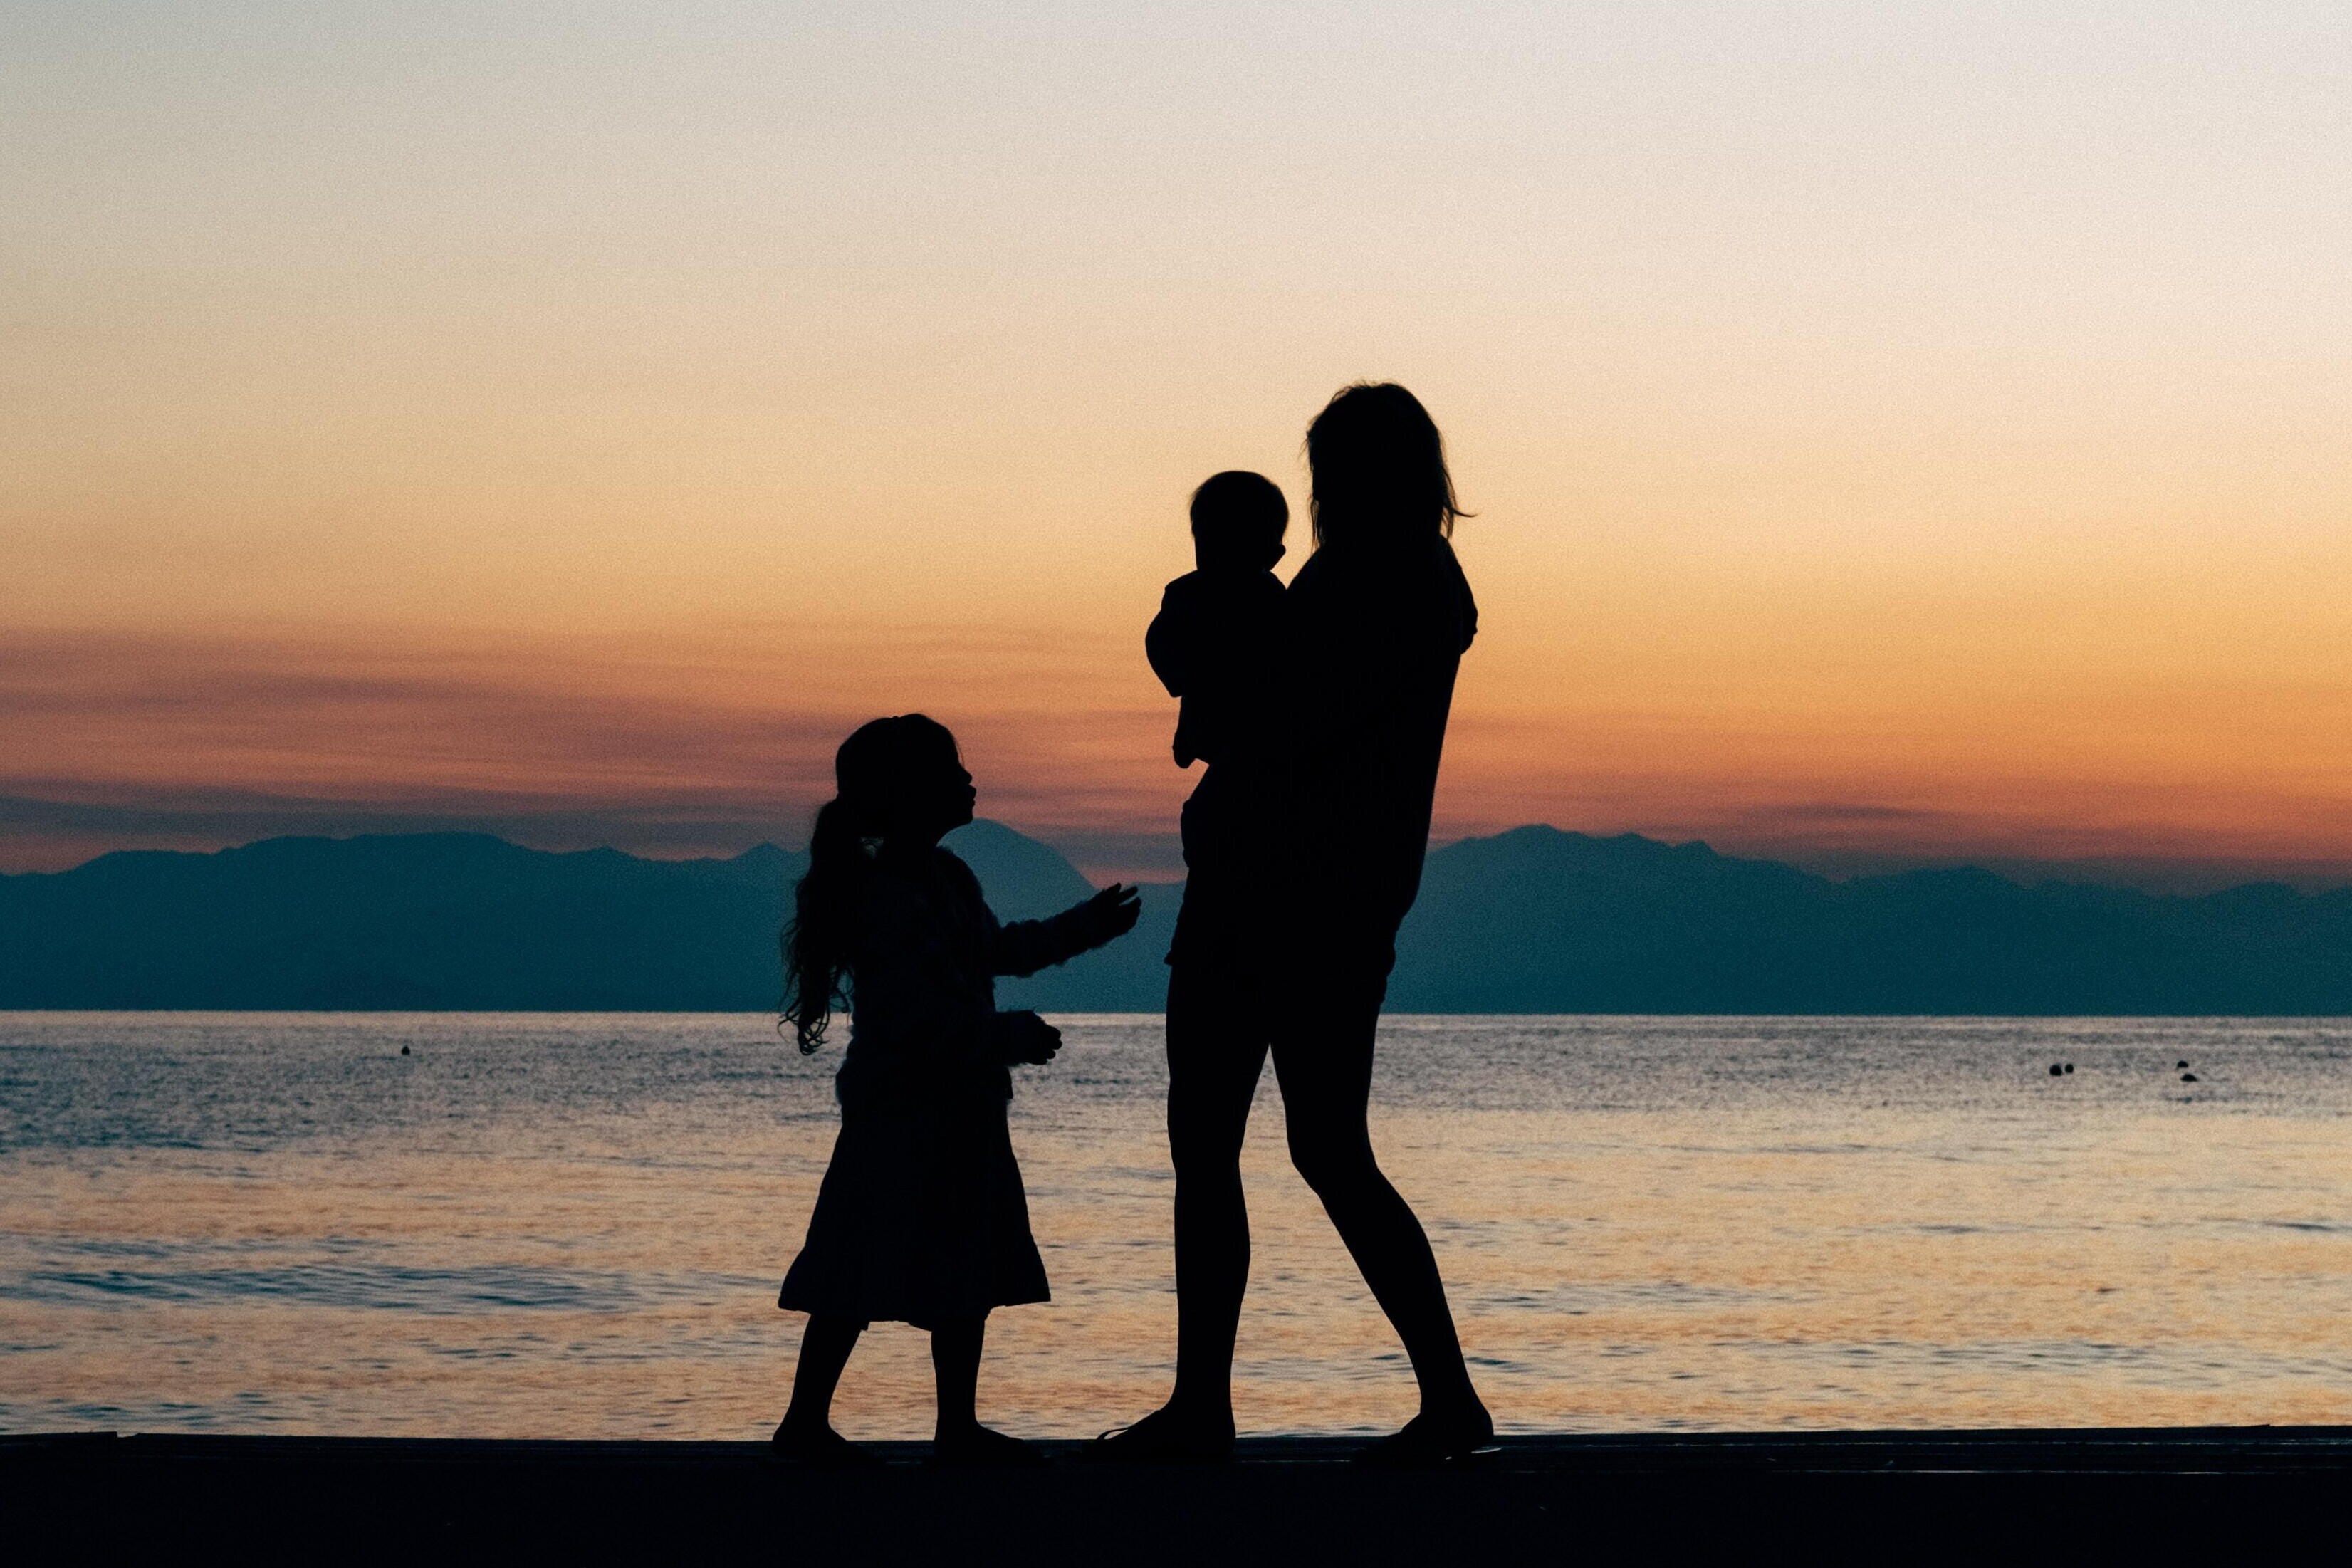 Silhouette of a family walking on the beach at sunset